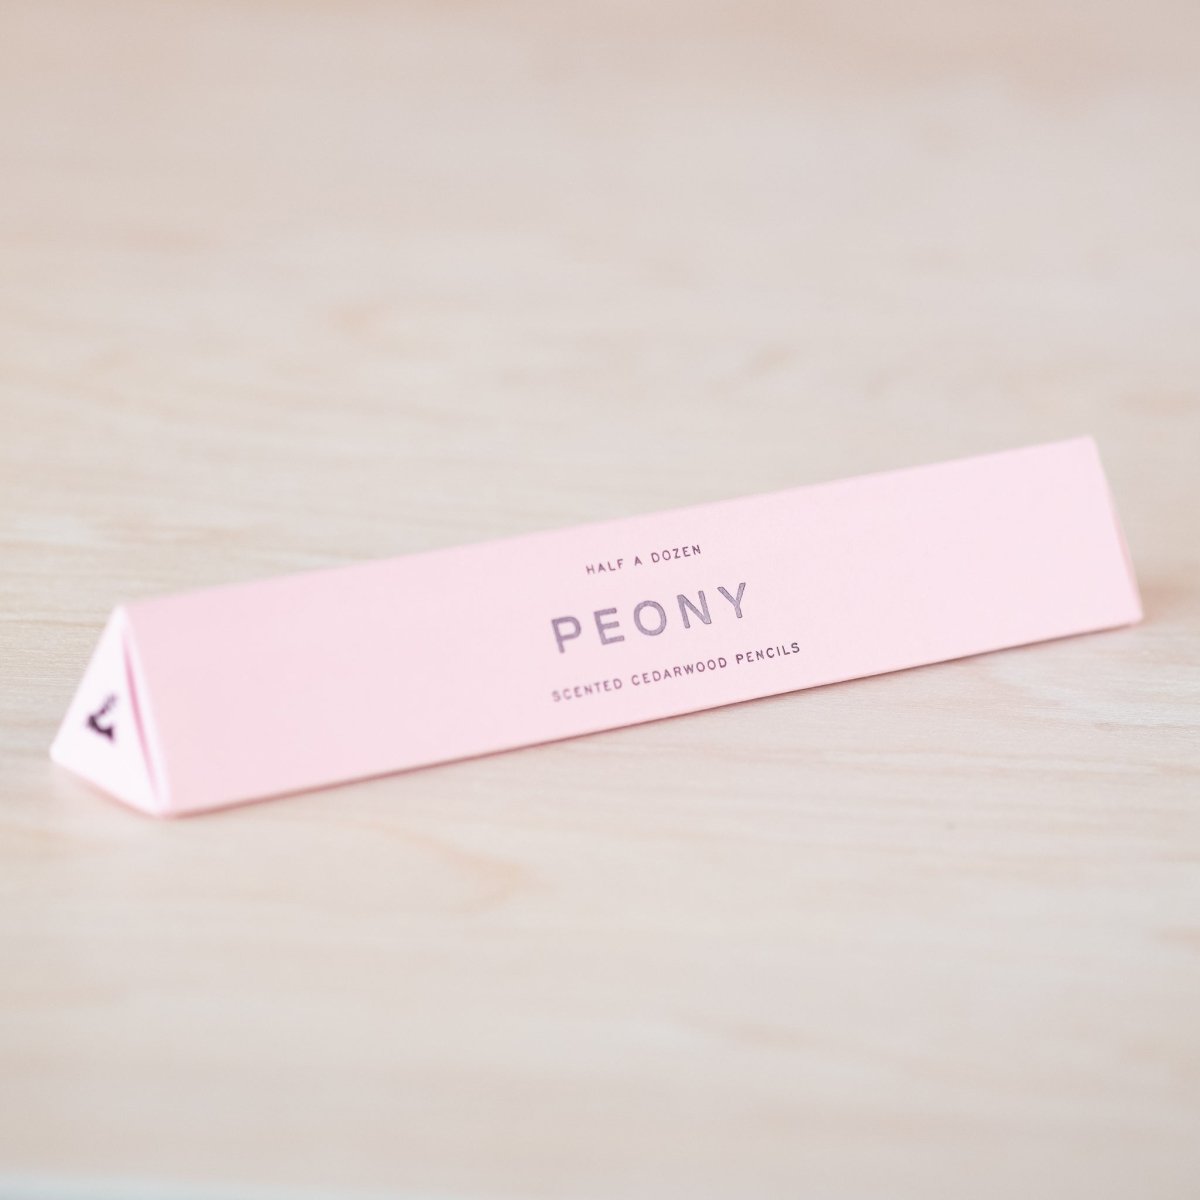 A box of Peony scented pencils